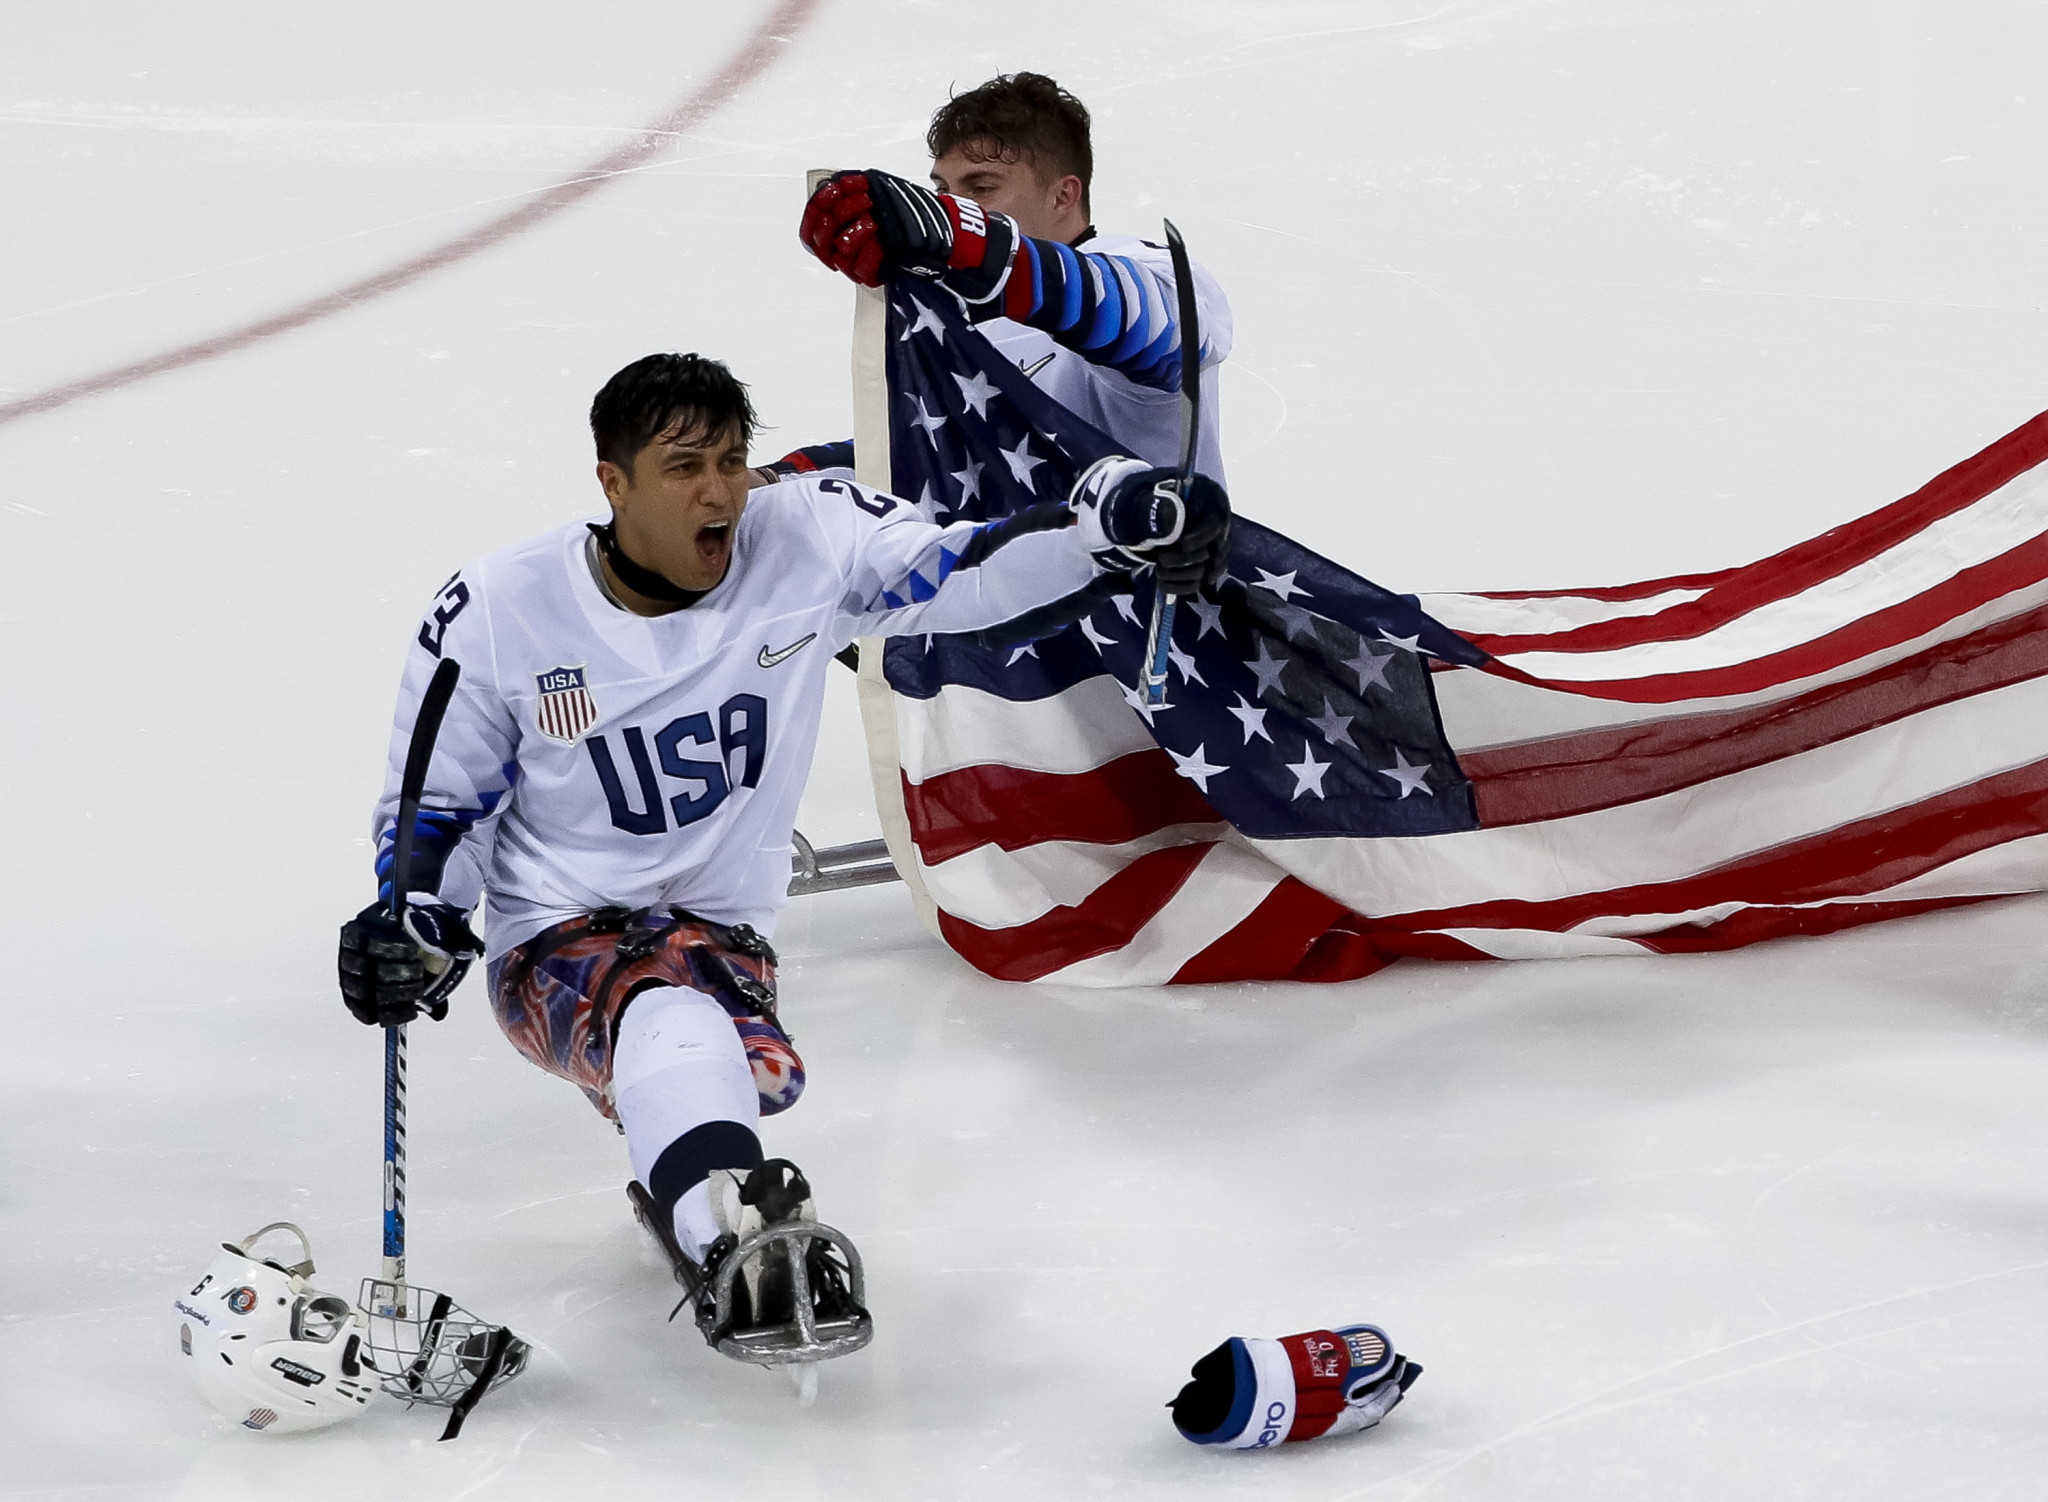 The United States defeated Canada in the Pyeongchang 2018 final to win their fourth gold medal, their third in row after Vancouver 2010 and Sochi 2014 ©Getty Images